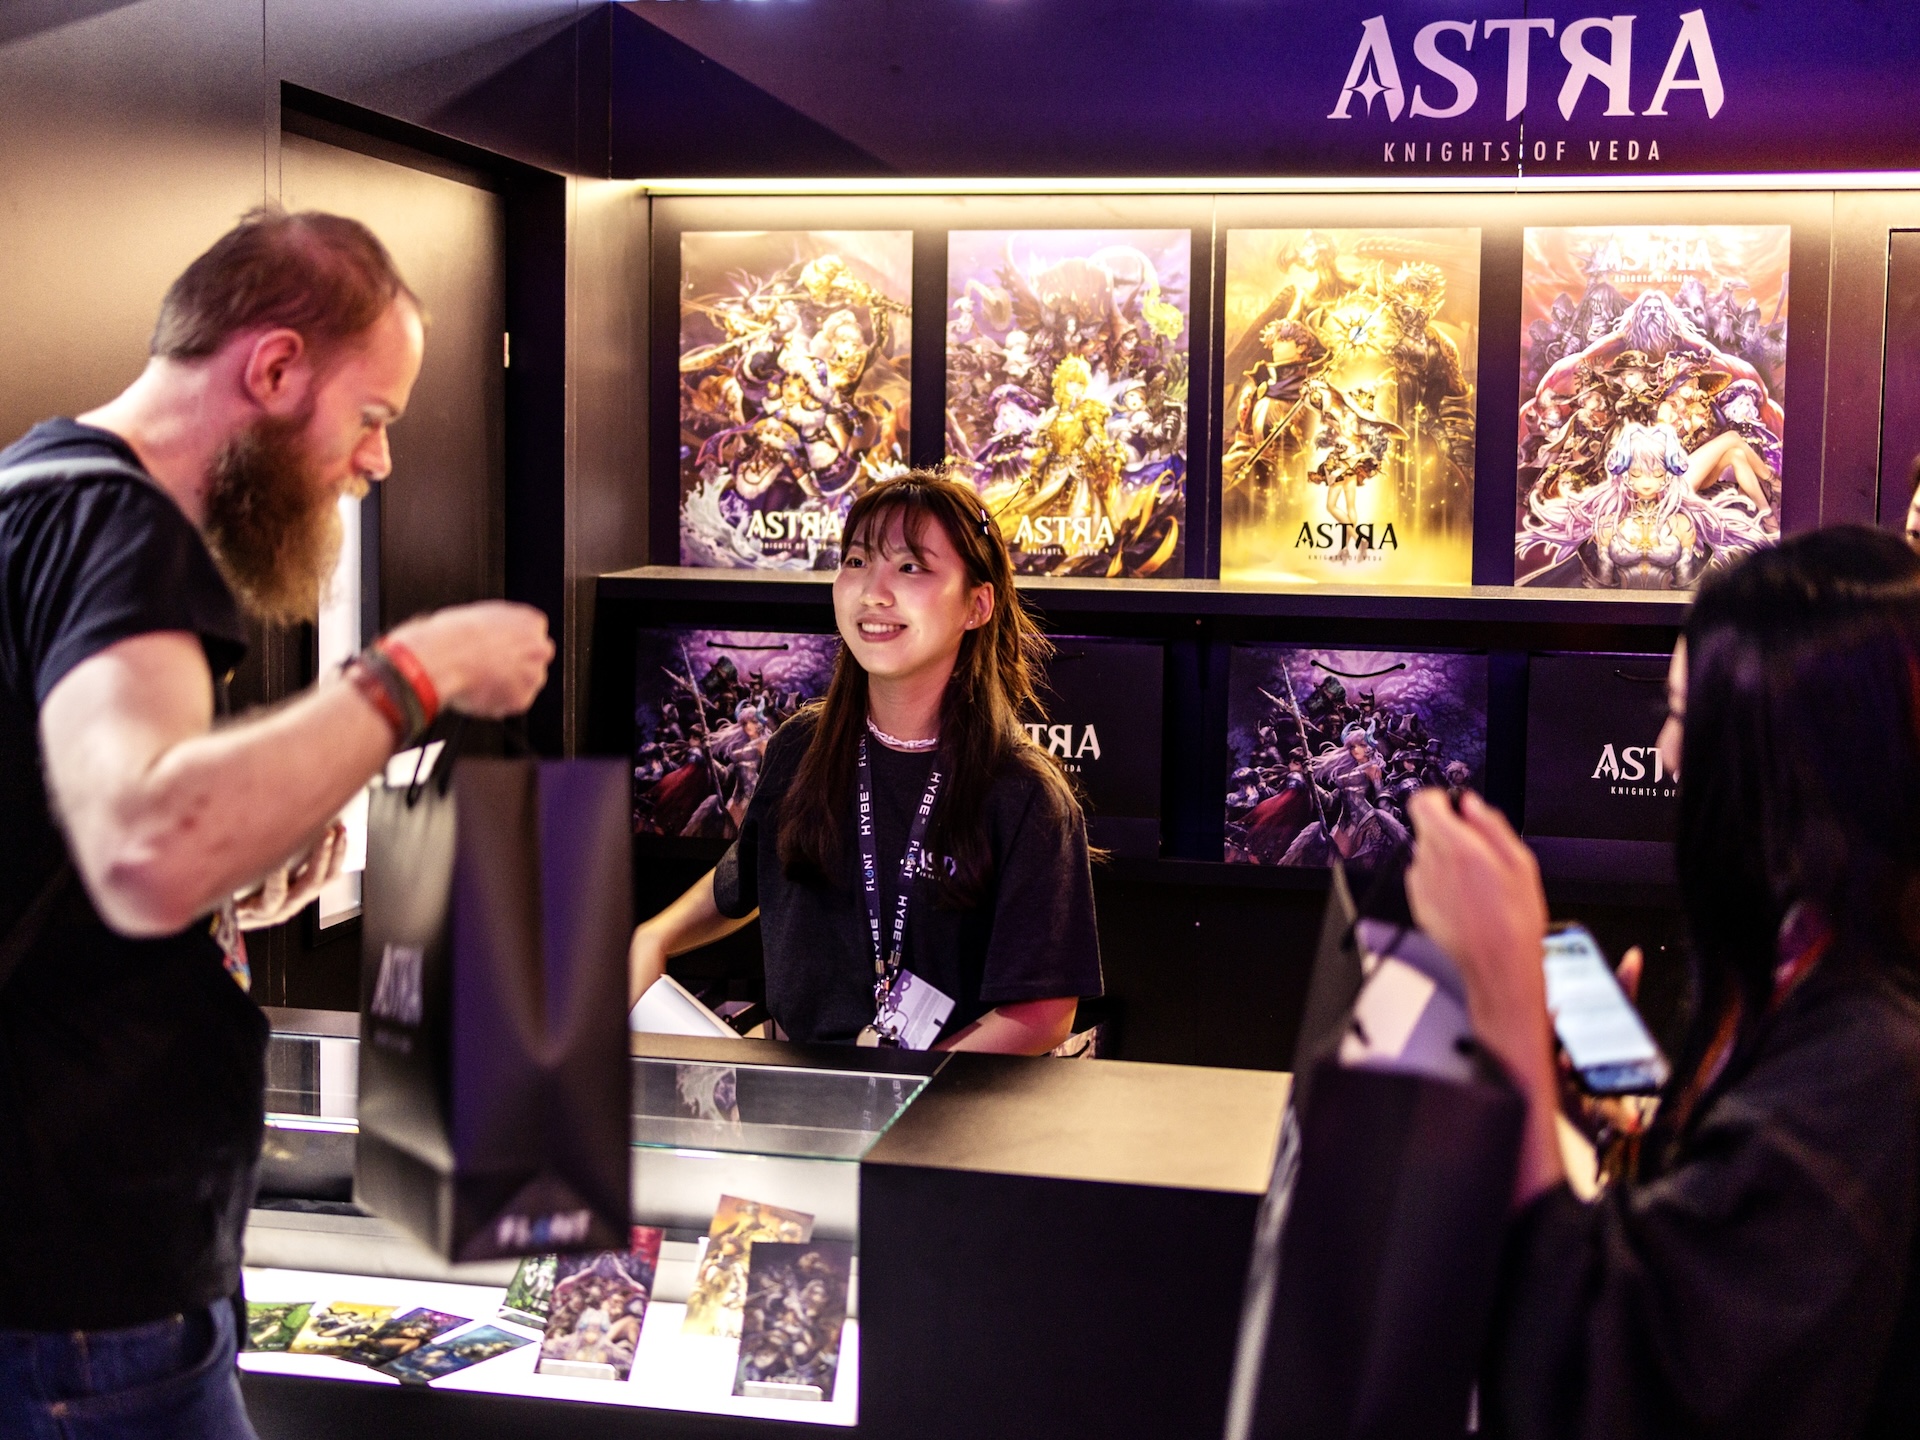 Gamescom tips for exhibitors by Gamescom agency, a guy picking up a merch bag at the front